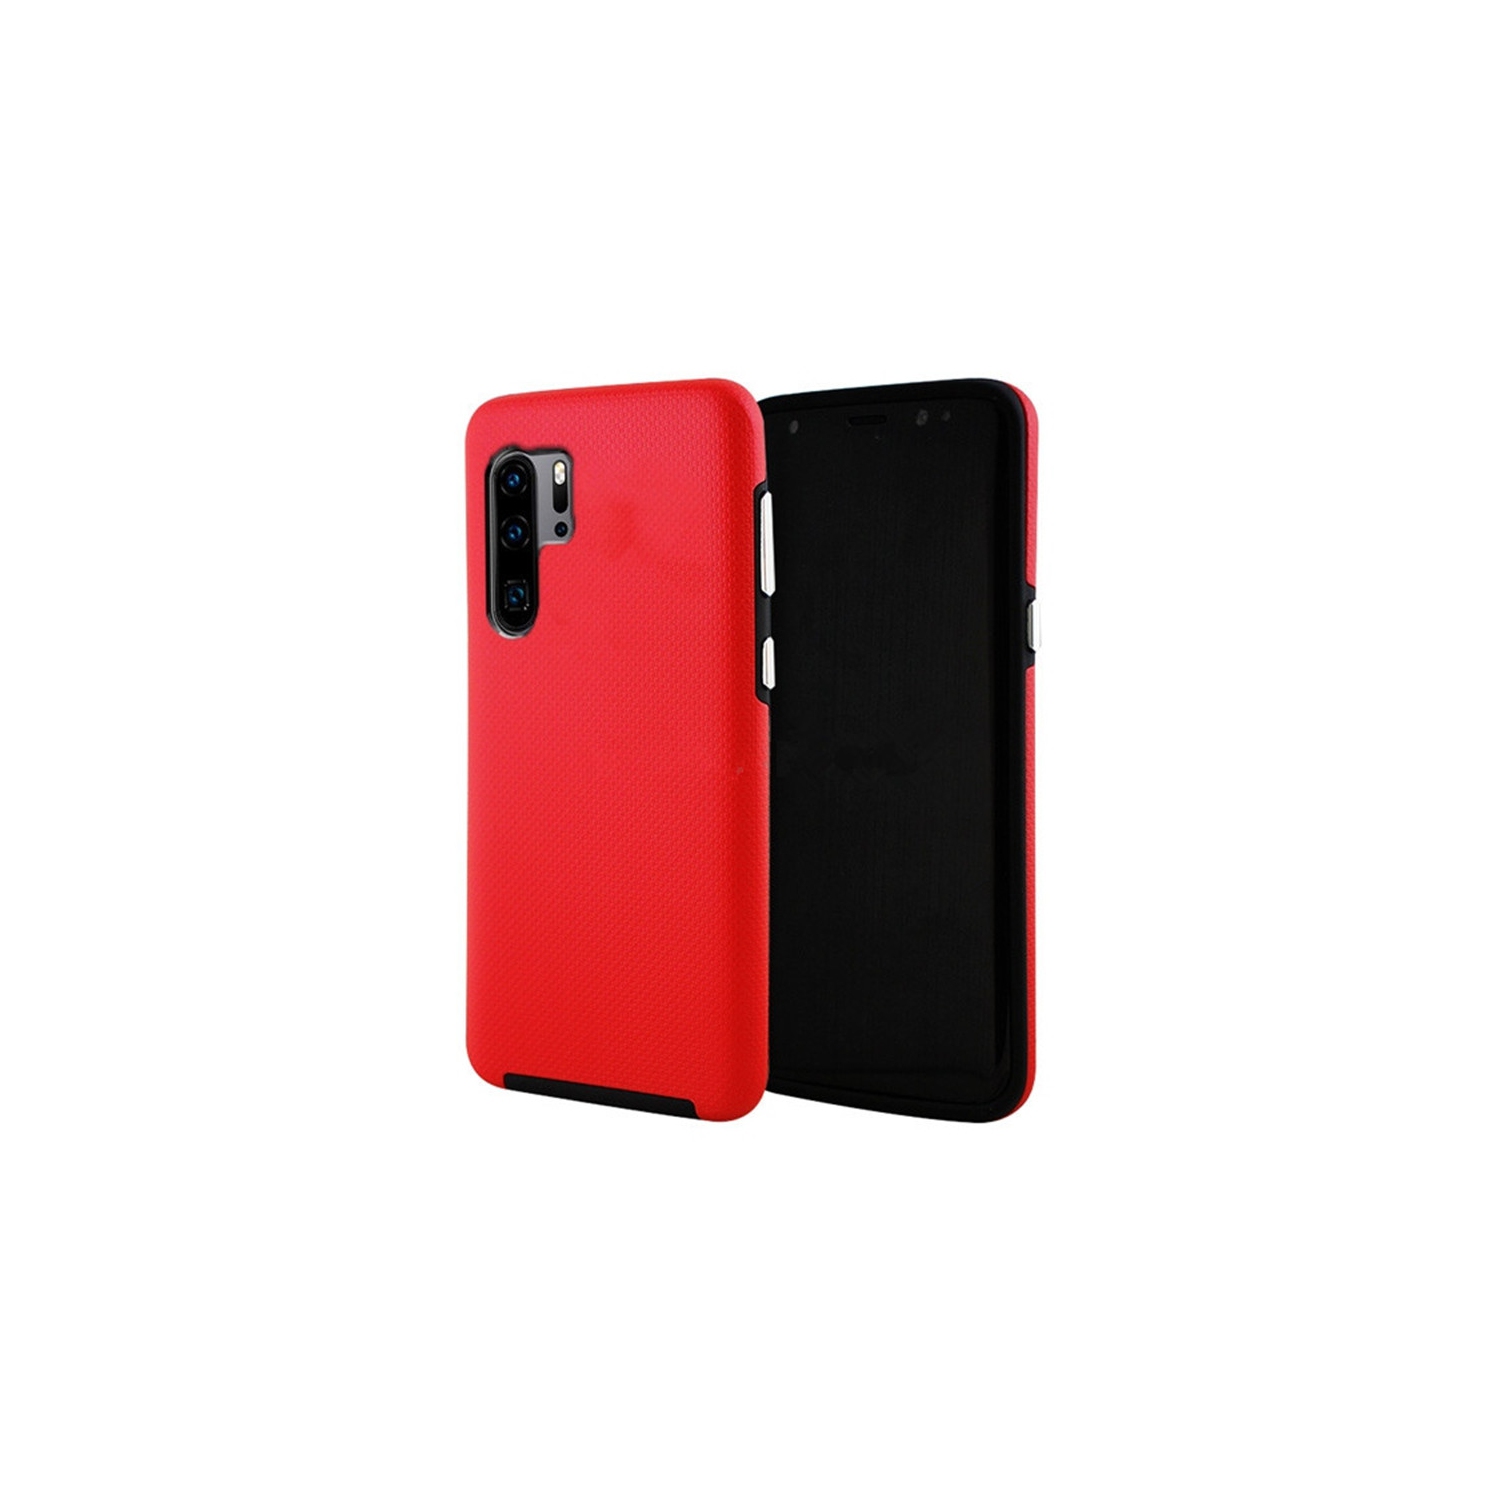 【CSmart】 Slim Fitted Hybrid Hard PC Shell Shockproof Scratch Resistant Case Cover for Samsung Galaxy Note 10 Plus, Red